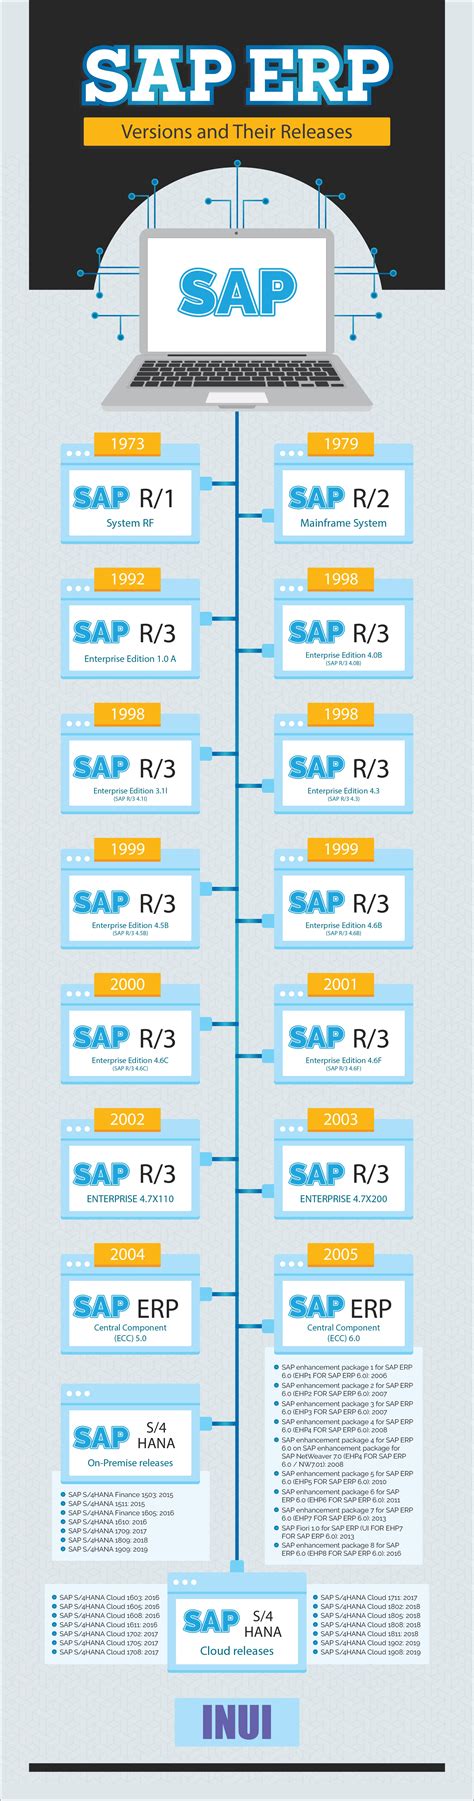 13 basic sap terms explained the sap full forms